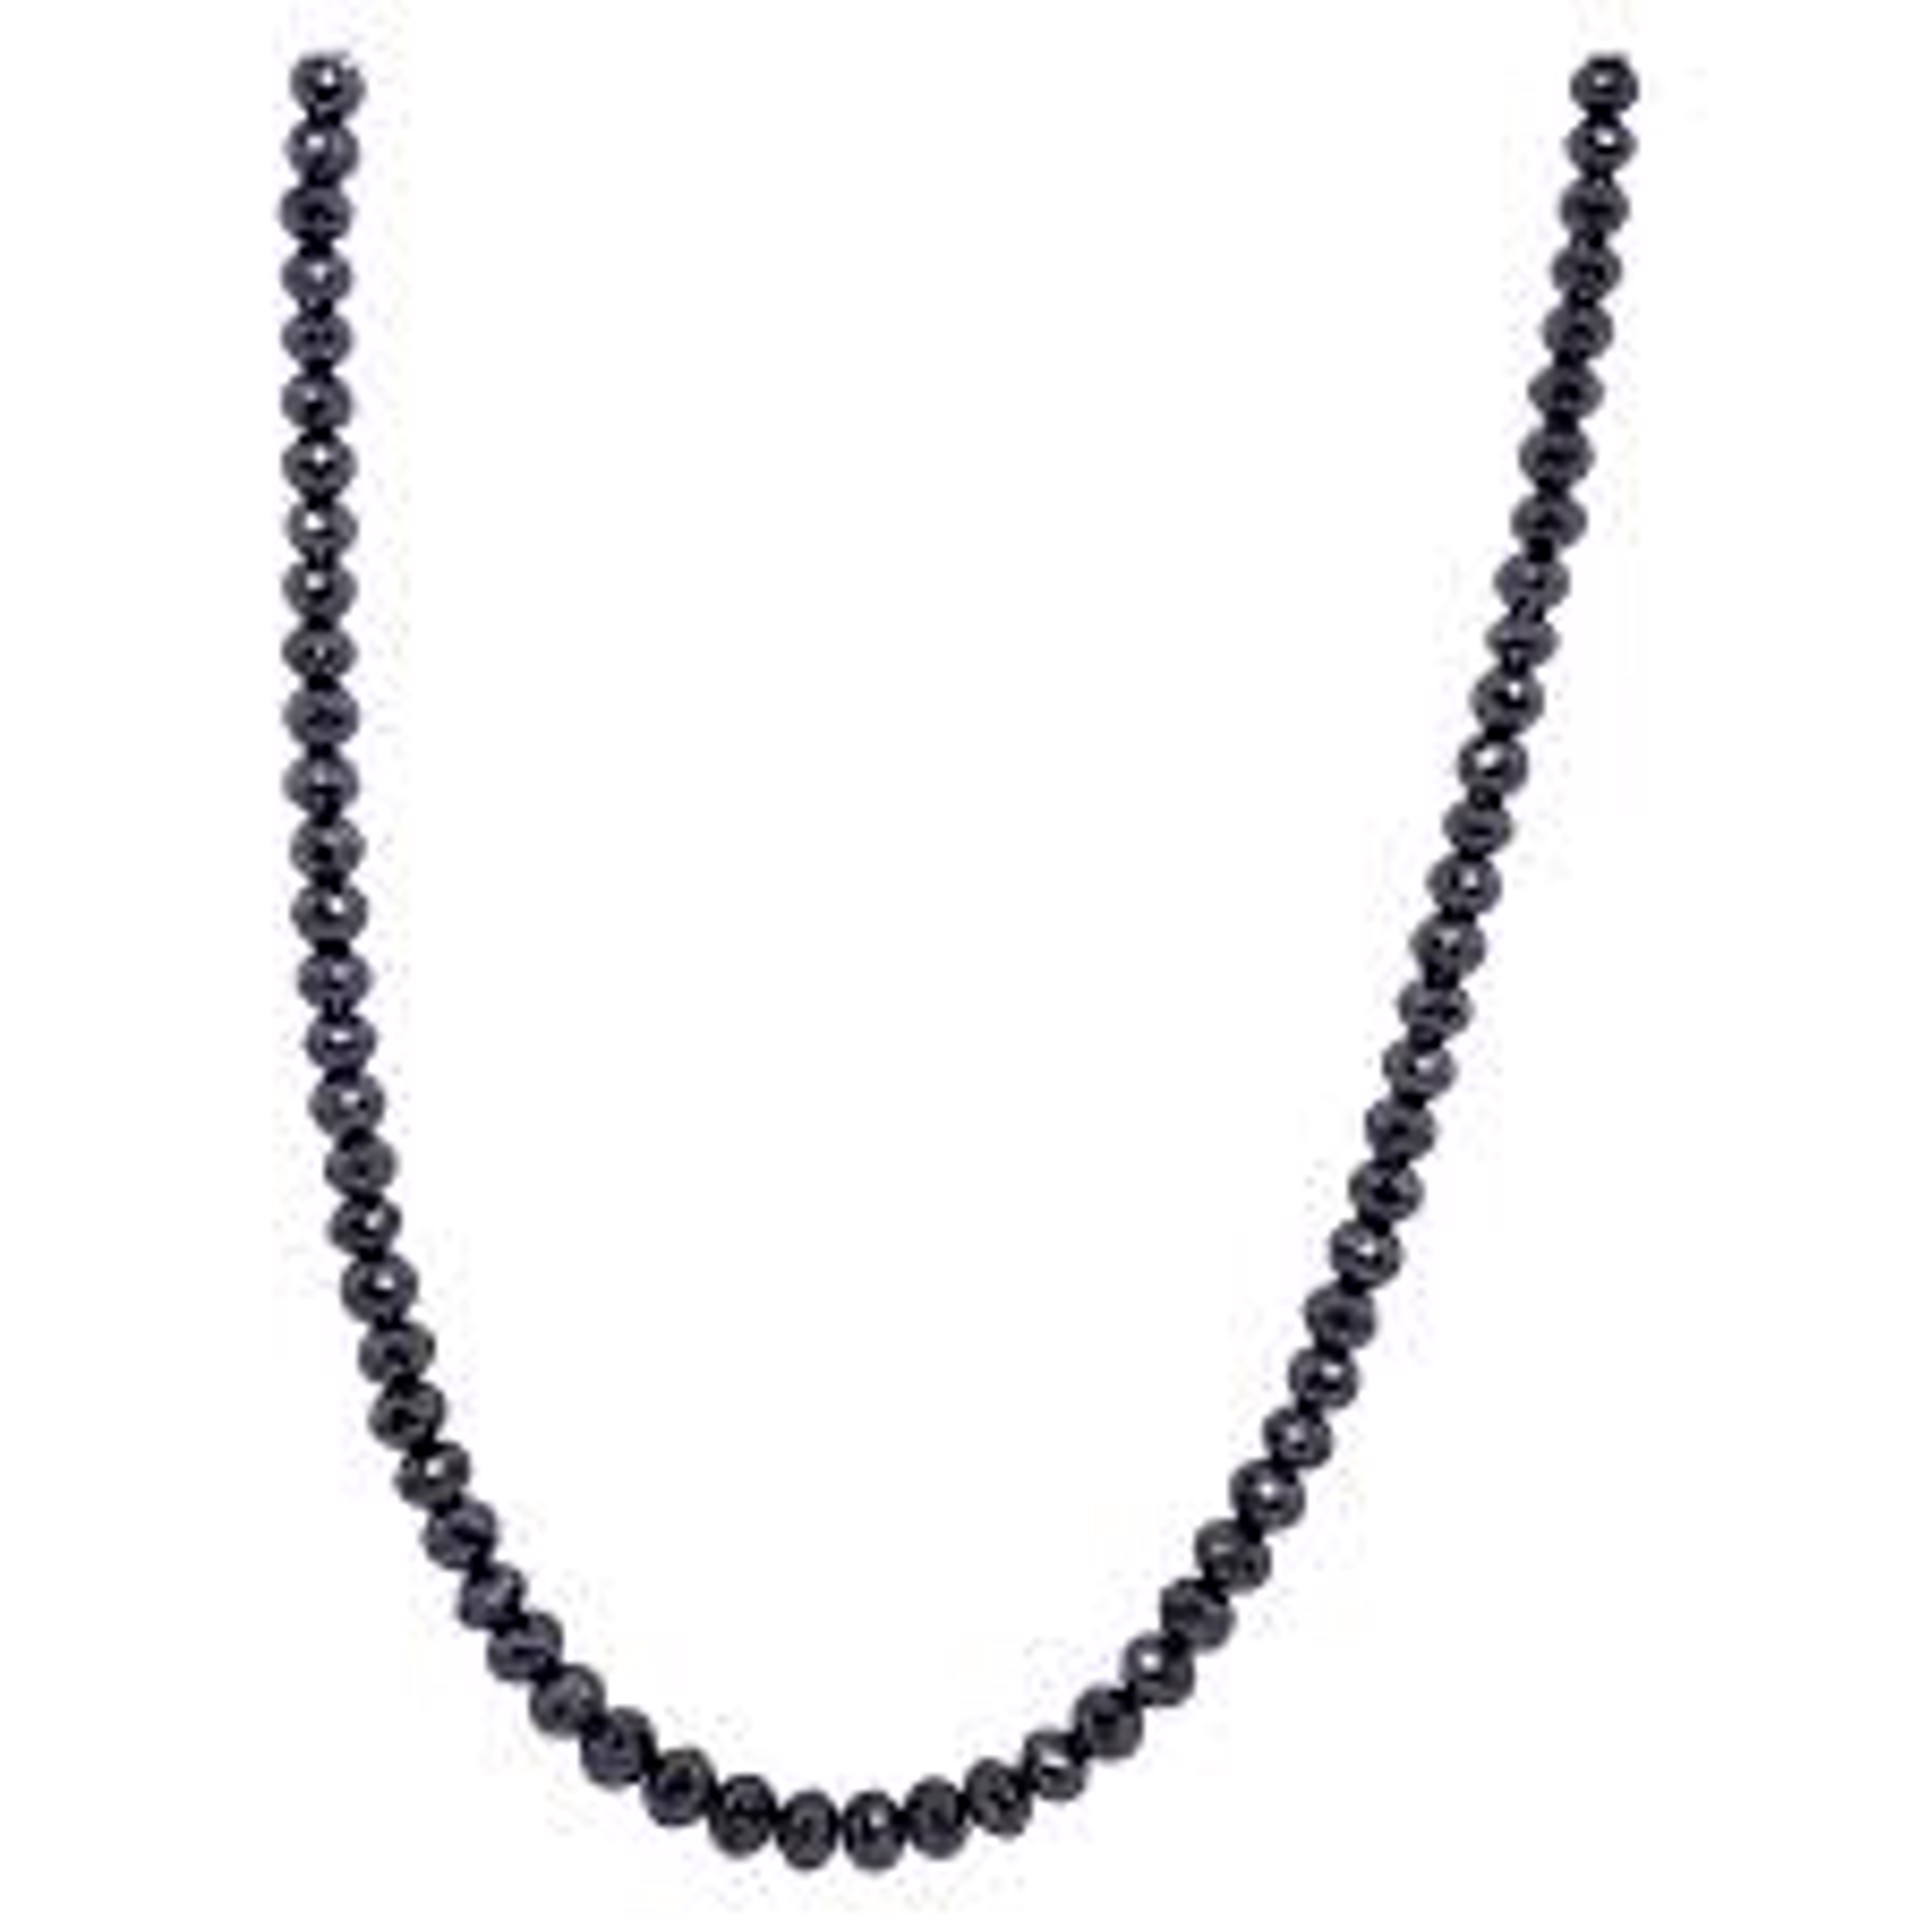 100 carat black diamond Strand with white diamond clasp by Llyn Strong